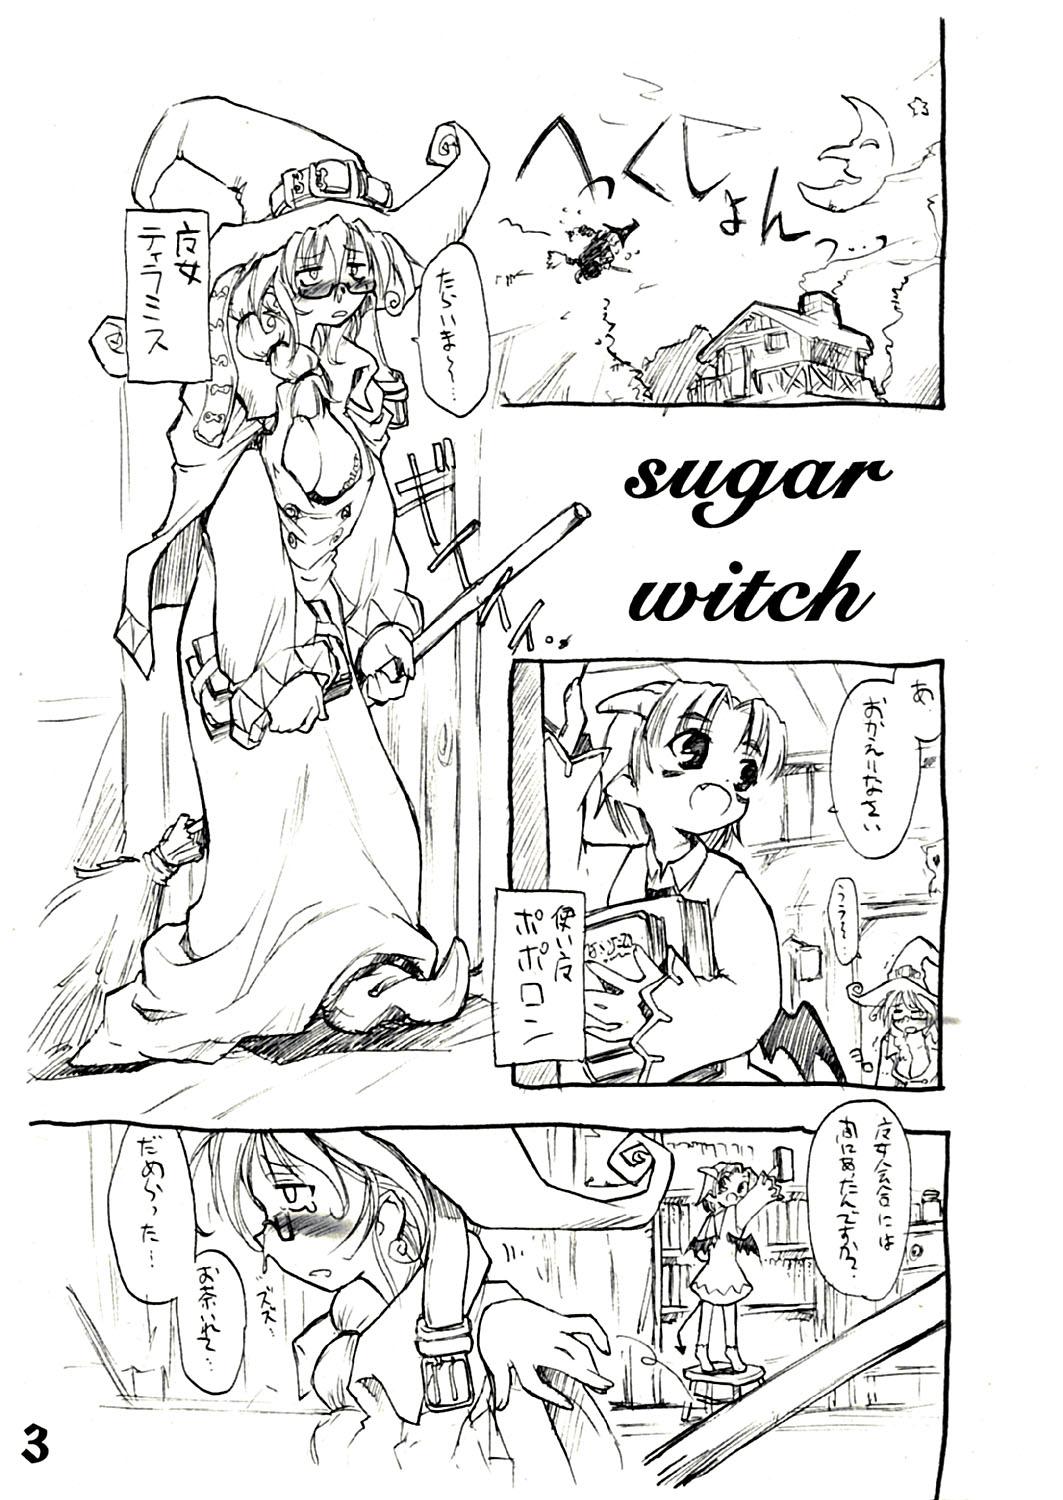 Family Sex SUGAR WITCH Exposed - Page 3